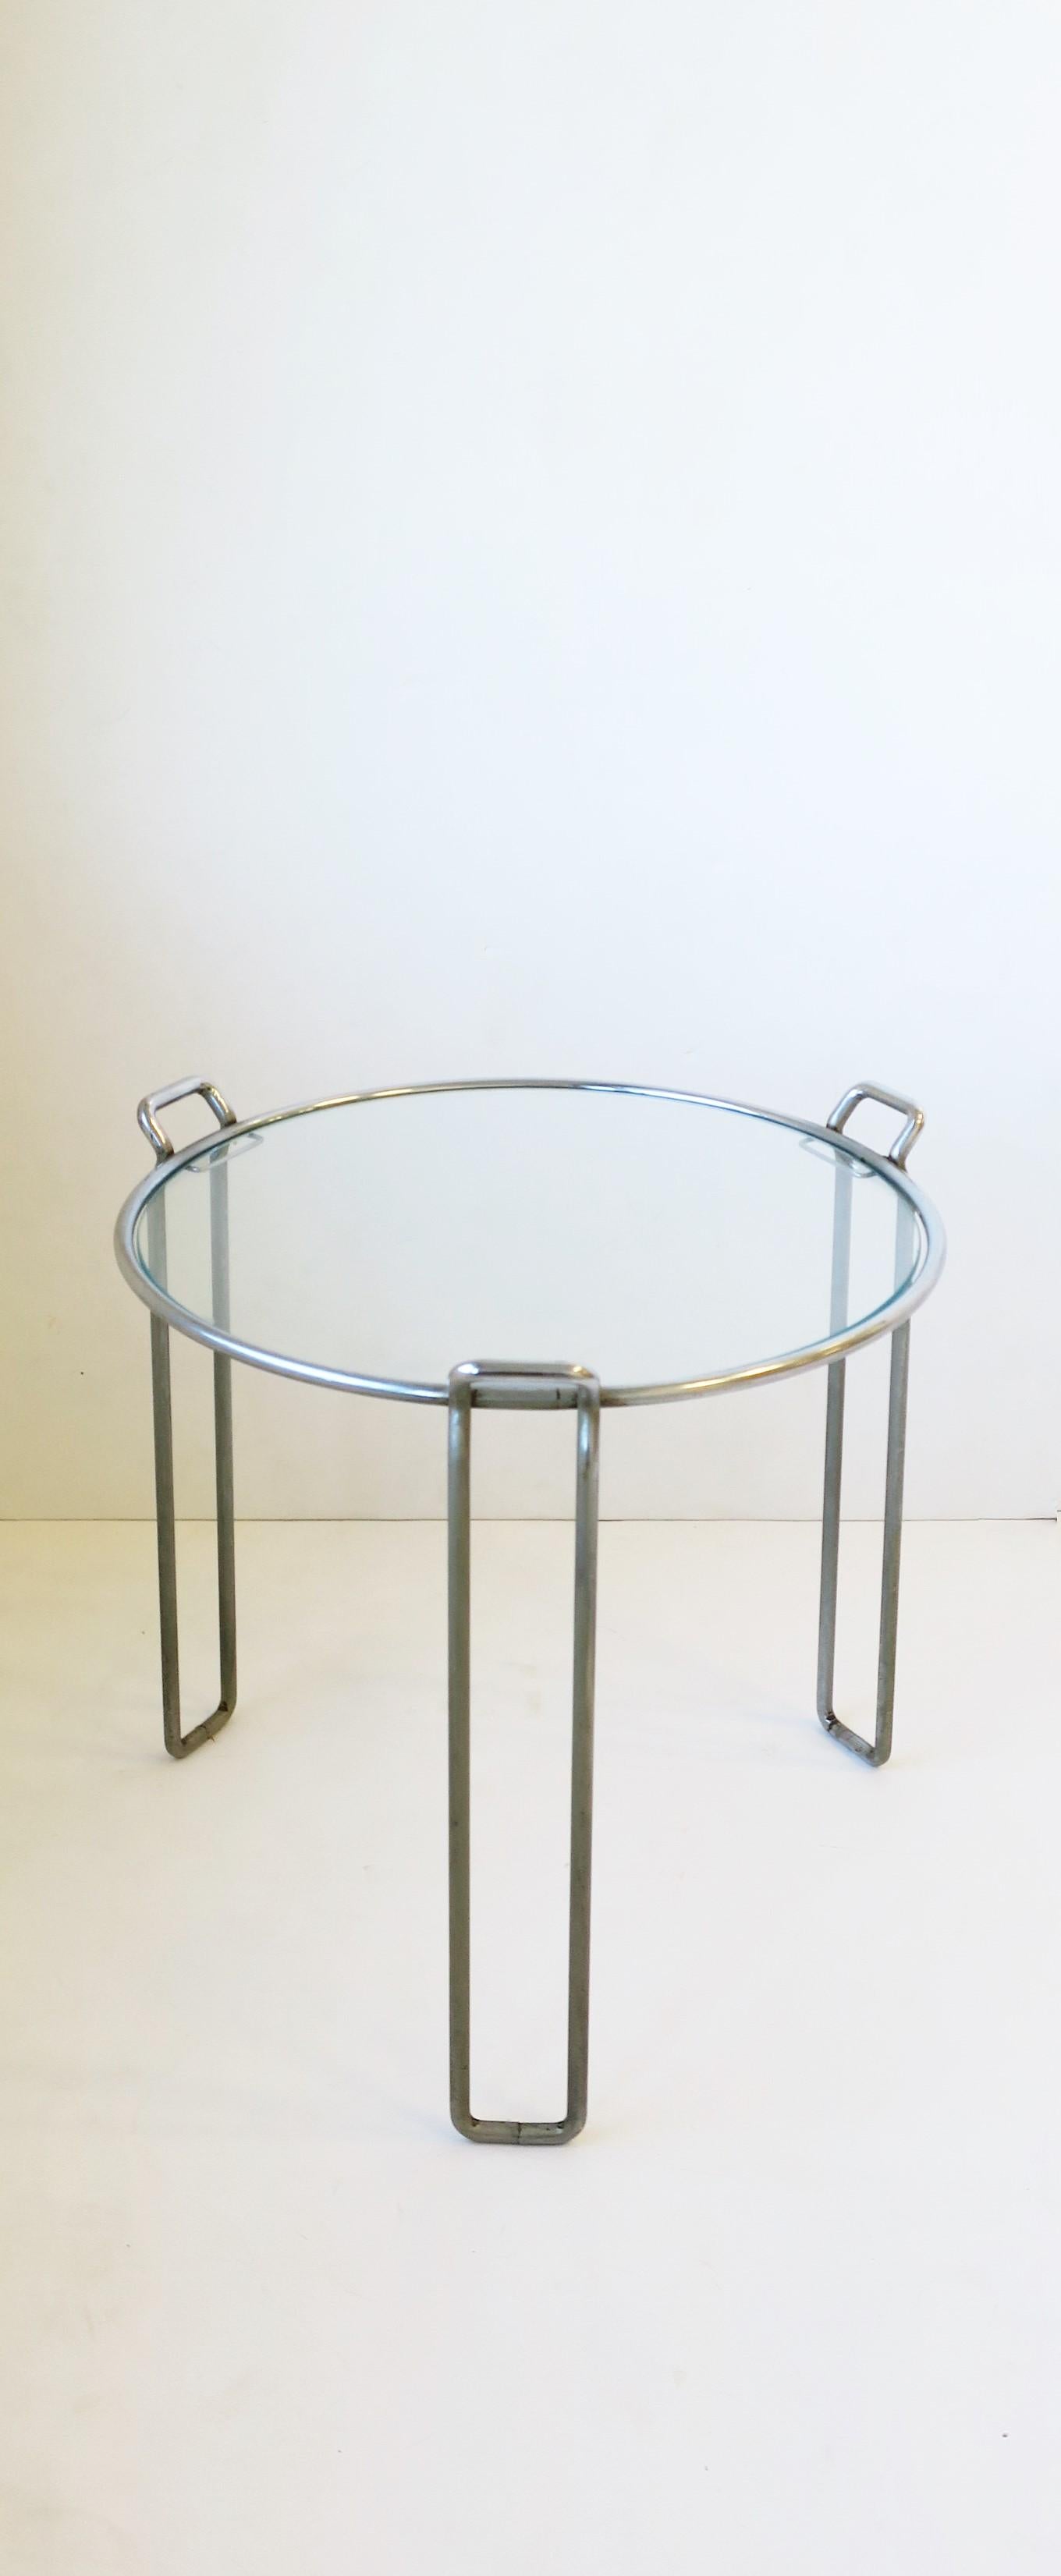 A vintage Modern or Mid-Century Modern period side or drinks table with chrome-plated frame and circular glass top, circa 1960s. In the style of Italian designer Saporiti. Dimensions: 15